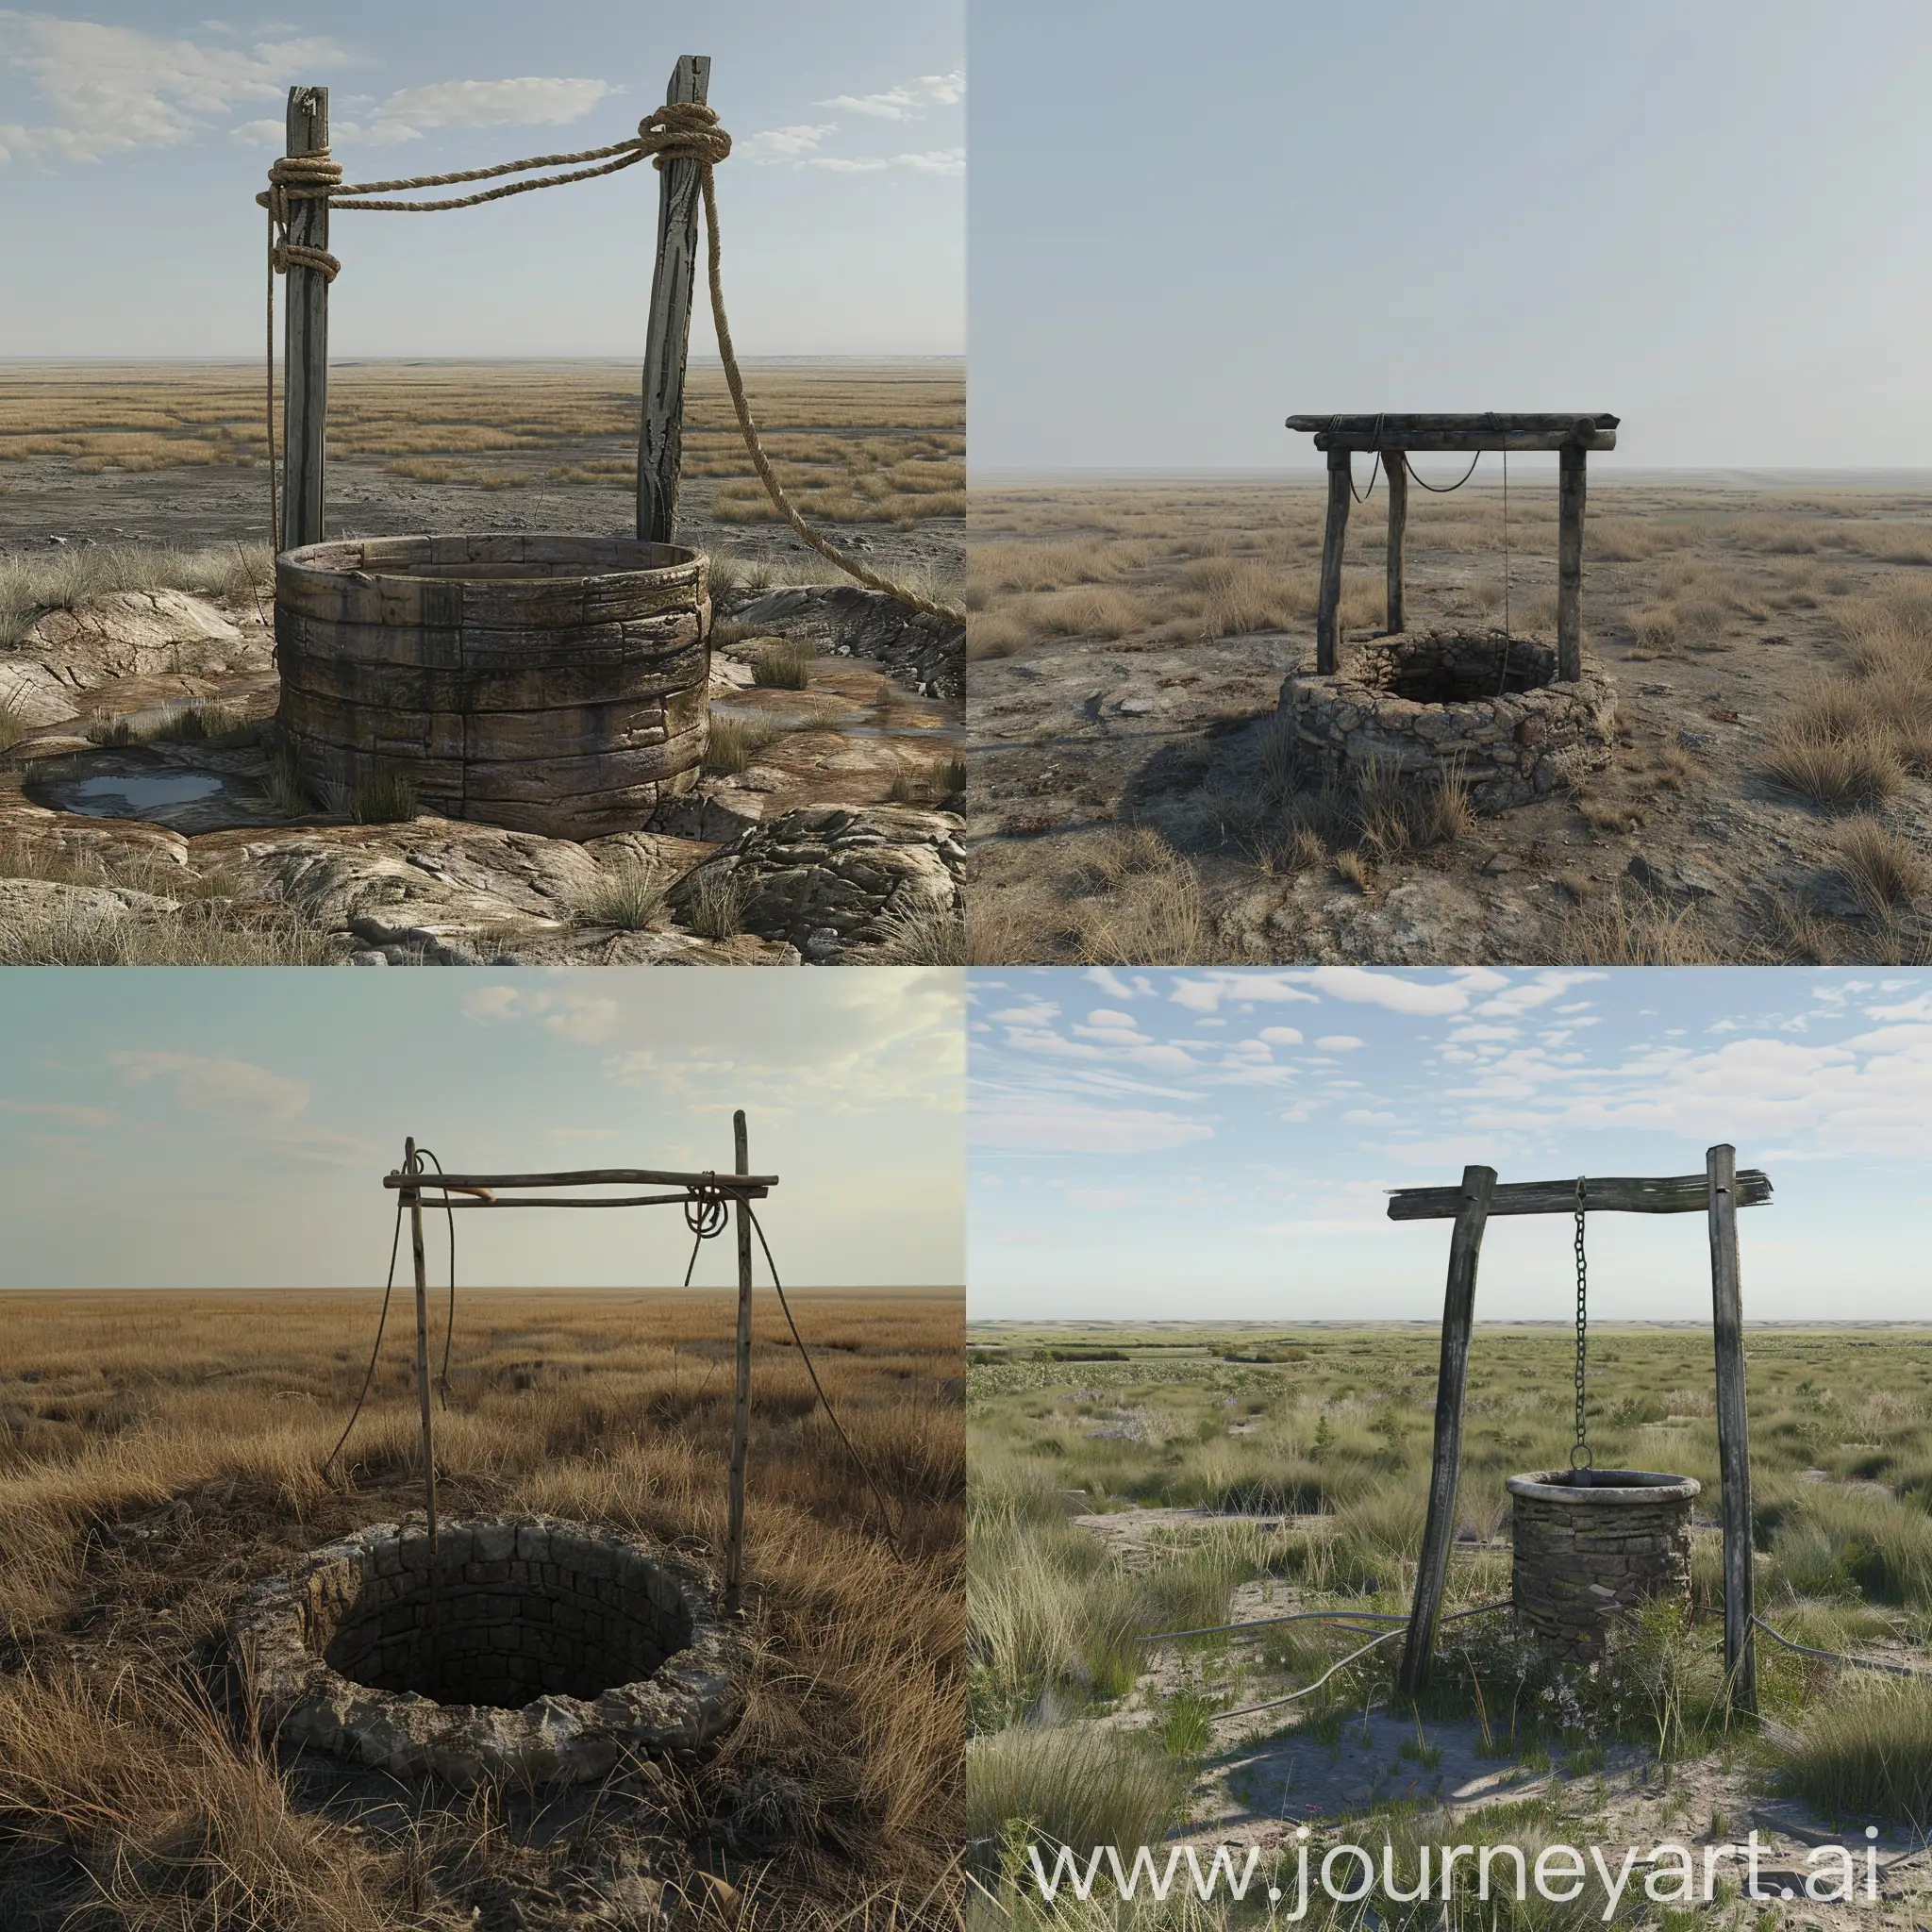 Lonely-Old-Well-in-Vast-Steppe-Landscape